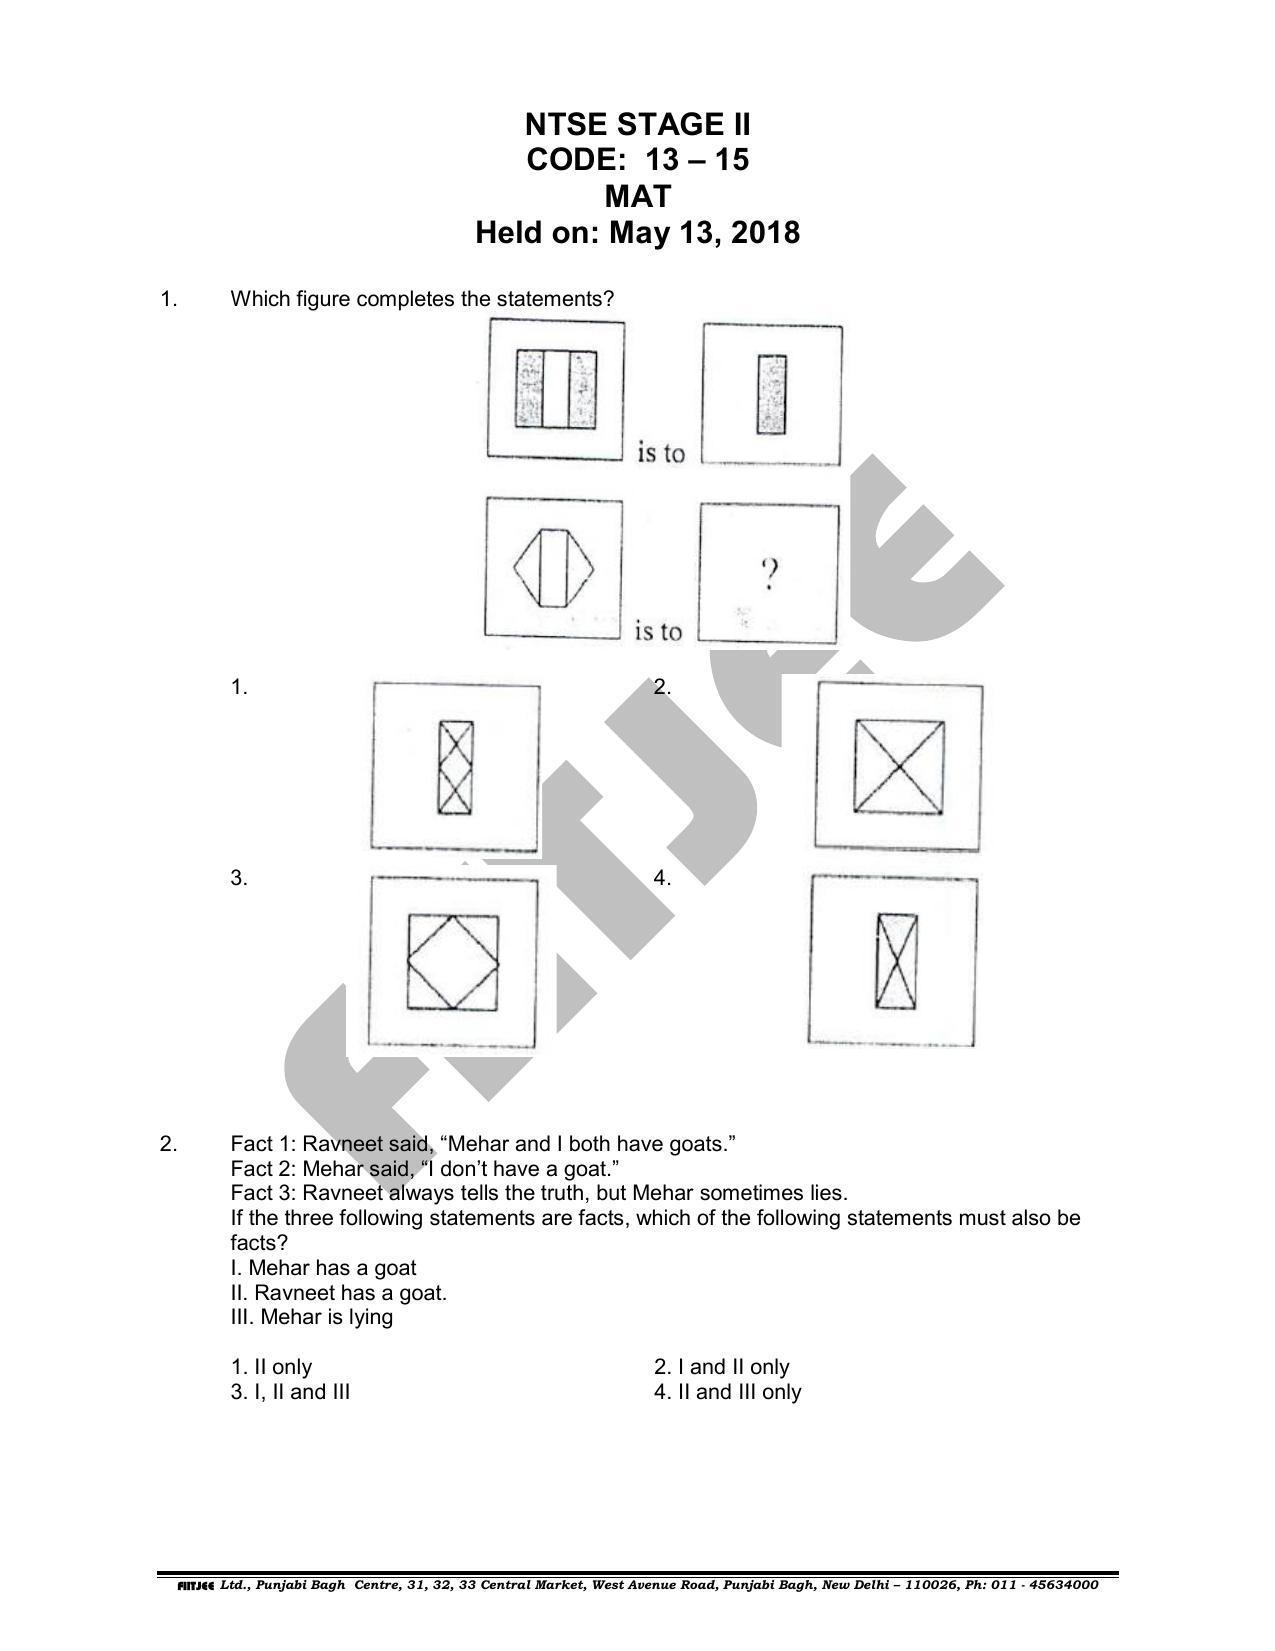 NTSE 2018 (Stage II) MAT Question Paper (May 13, 2018 ) - Page 1